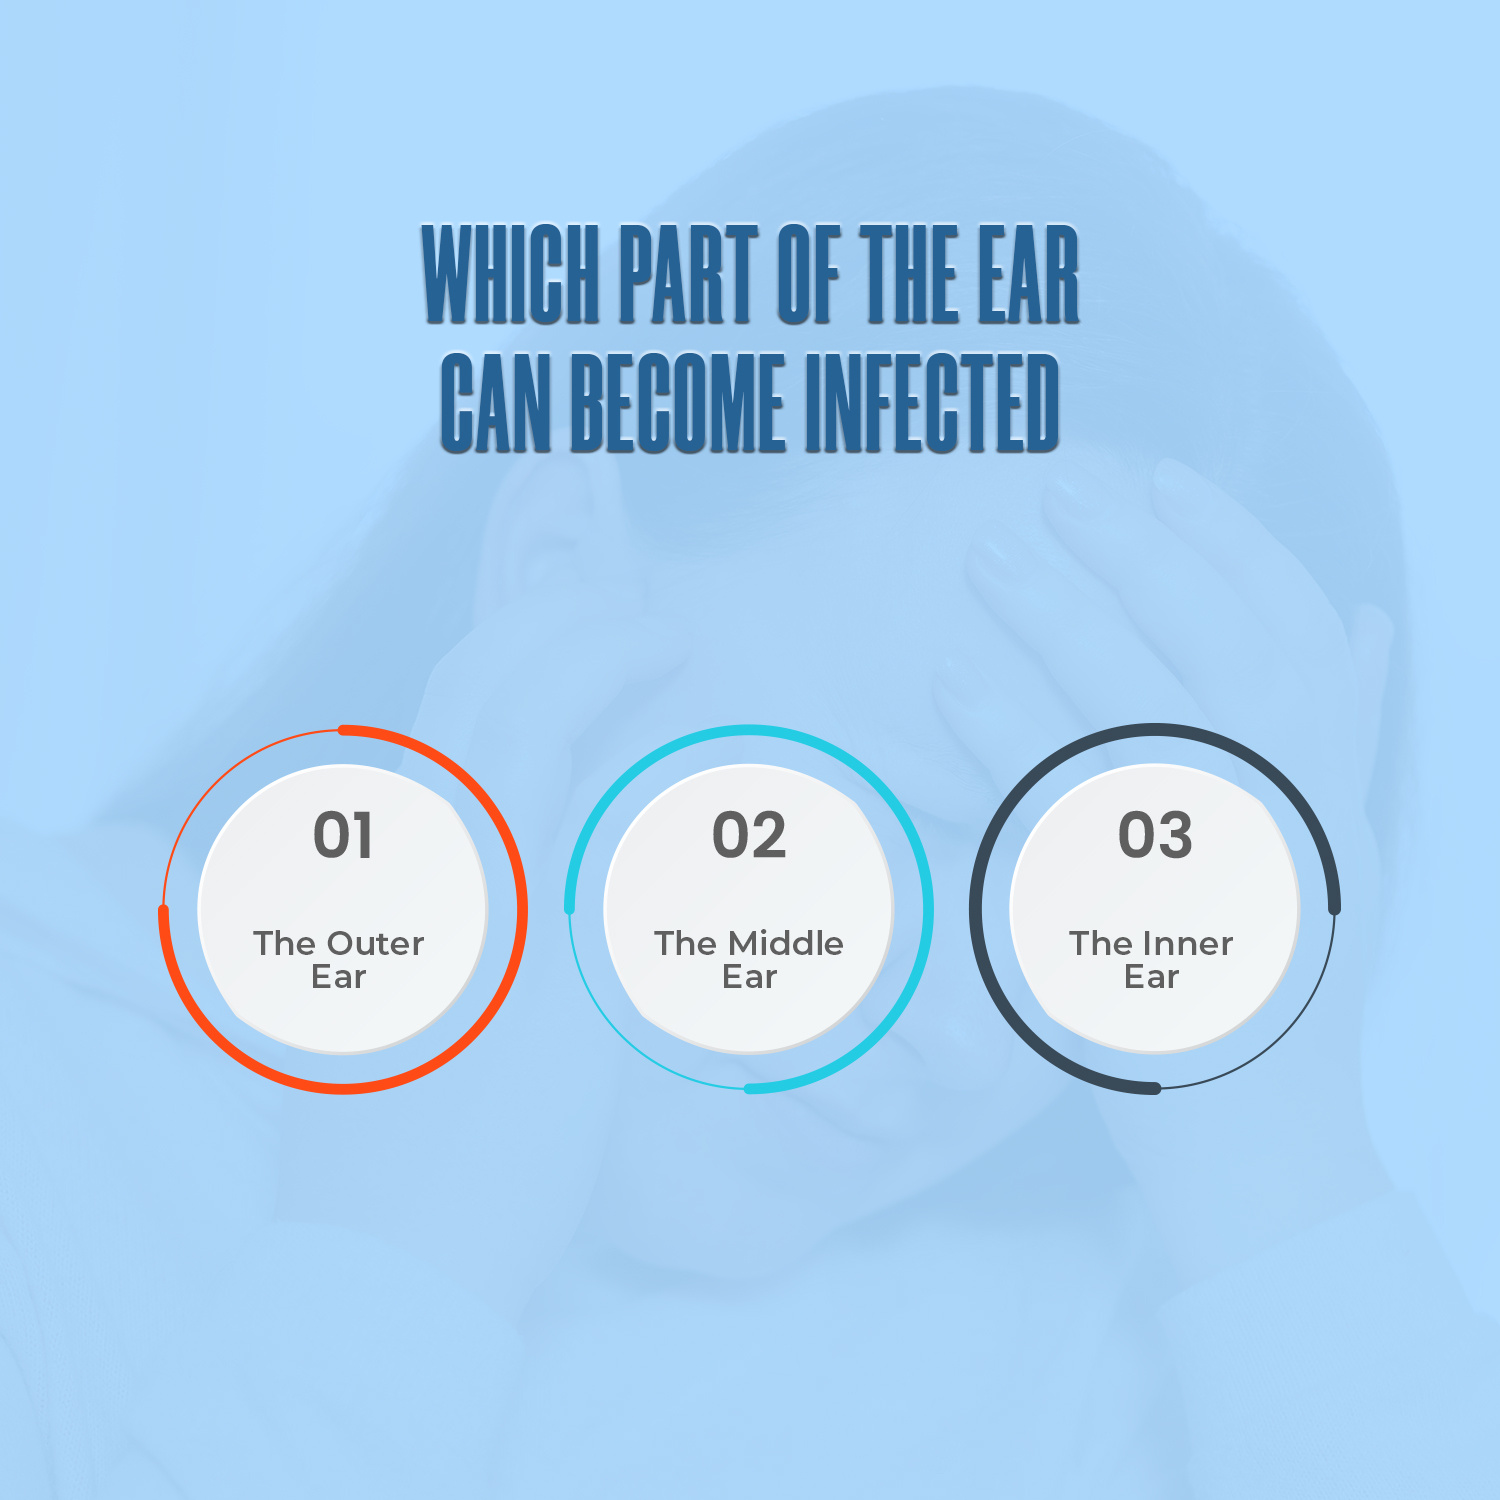 Which Part of the Ear Can Become Infected?